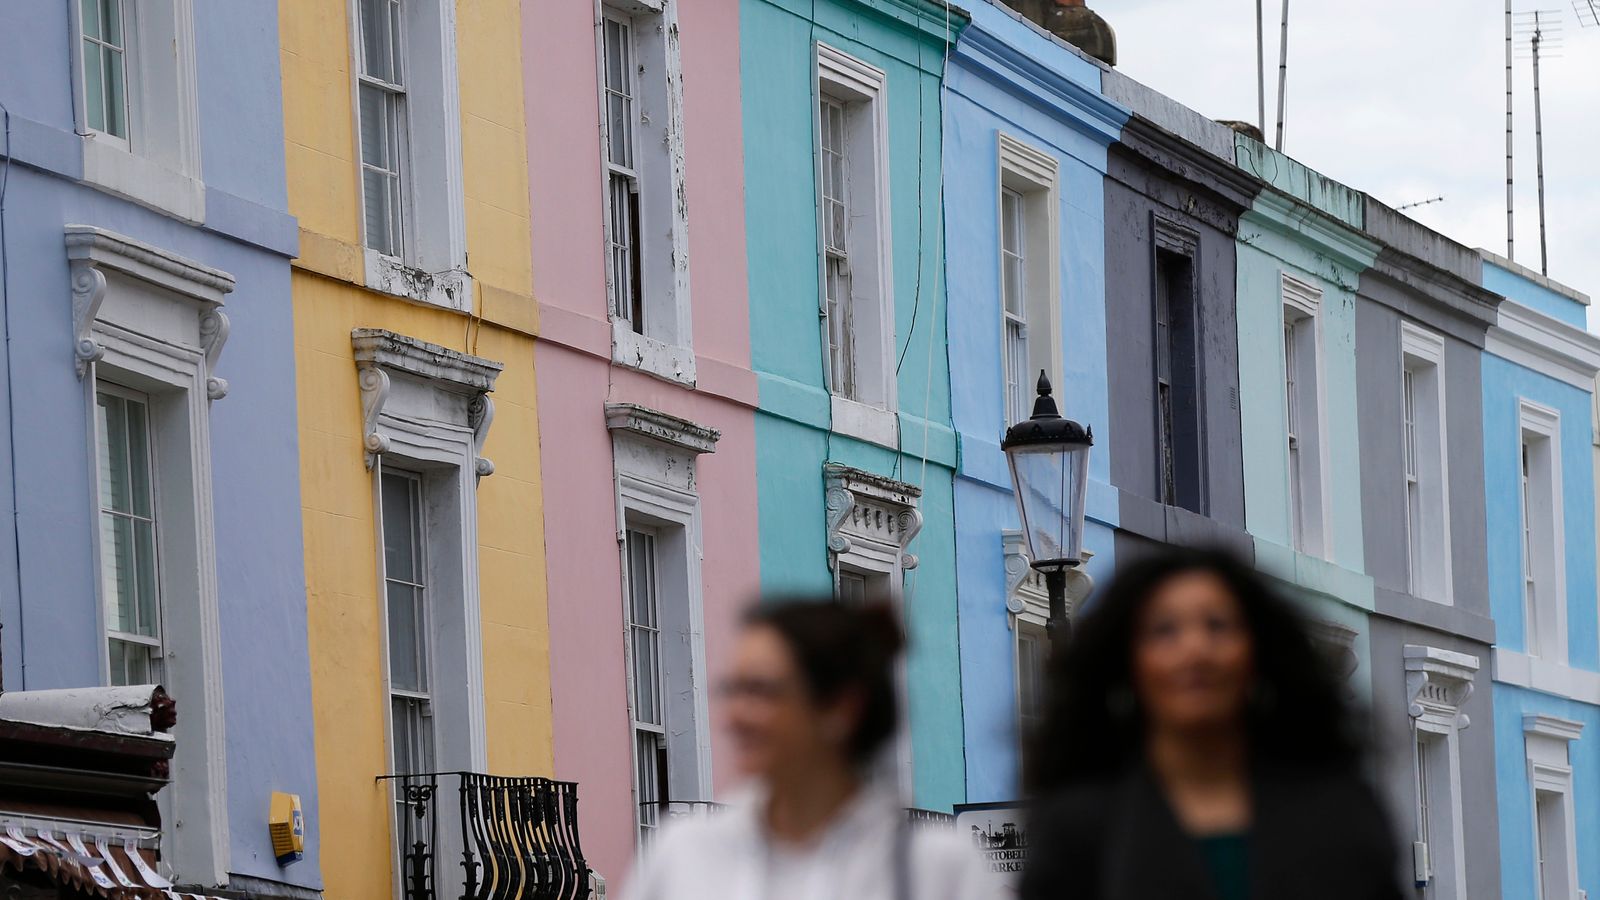 House prices 'rise for third month in a row' as buyer confidence increases